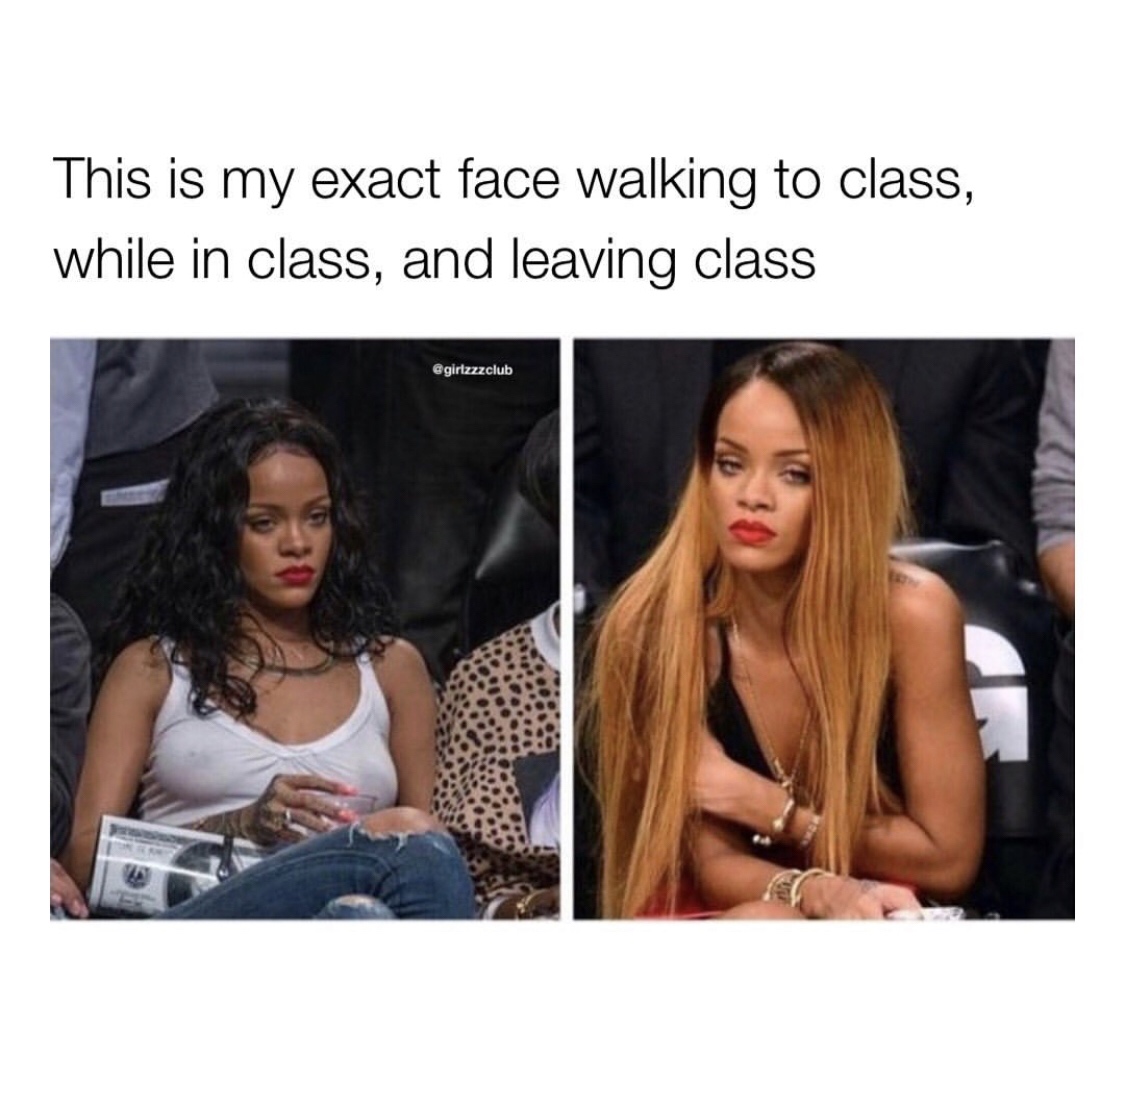 long hair - This is my exact face walking to class, while in class, and leaving class